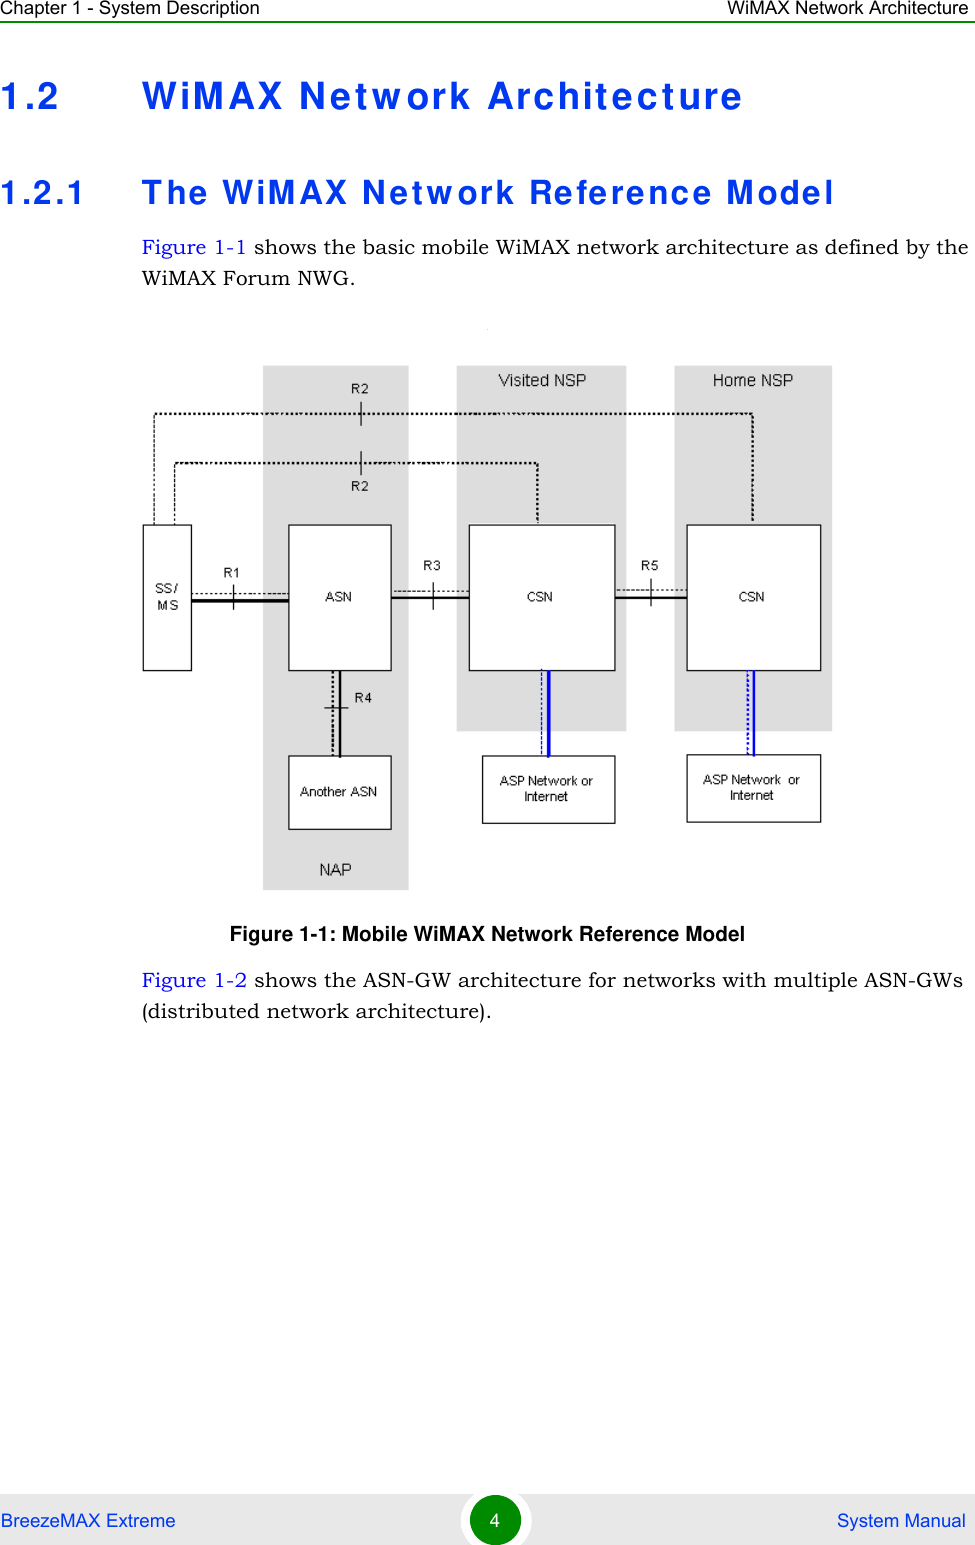 Chapter 1 - System Description WiMAX Network ArchitectureBreezeMAX Extreme 4 System Manual1.2 WiMAX Network Architecture1.2.1 The WiMAX Network Reference ModelFigure 1-1 shows the basic mobile WiMAX network architecture as defined by the WiMAX Forum NWG..Figure 1-2 shows the ASN-GW architecture for networks with multiple ASN-GWs (distributed network architecture).Figure 1-1: Mobile WiMAX Network Reference Model